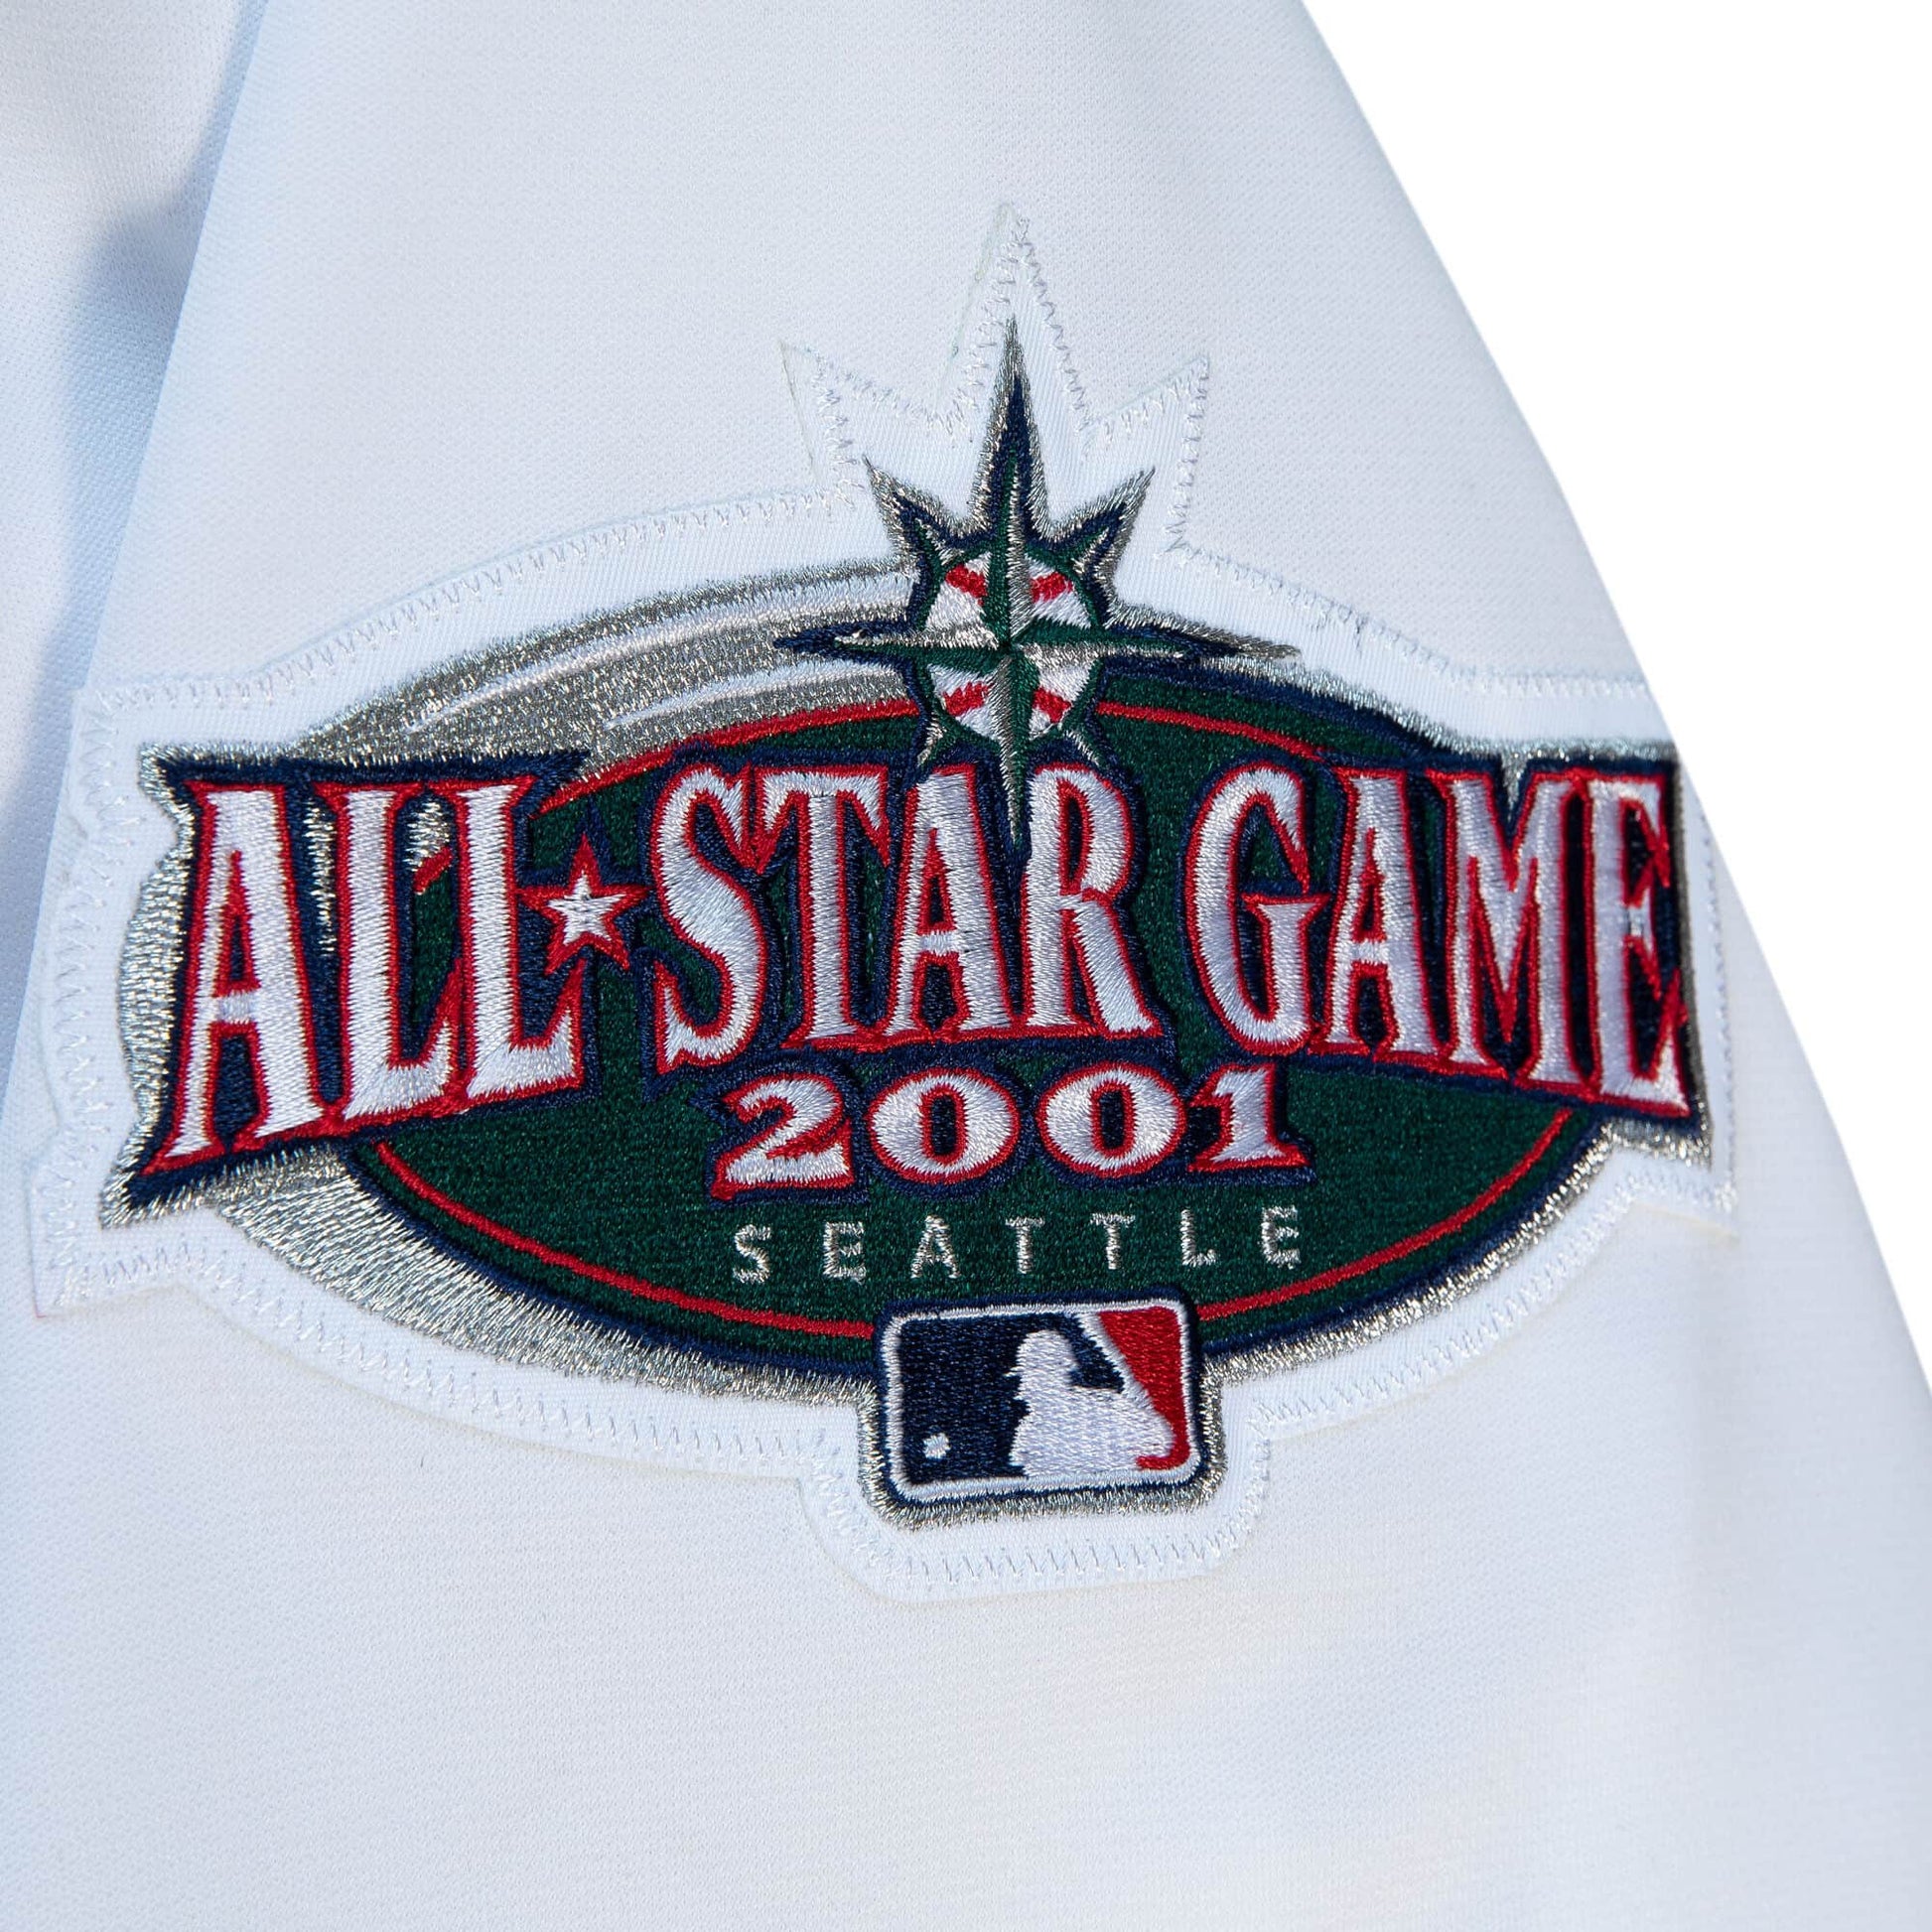 Seattle Mariners All Star Game Gear, Mariners All Star Game